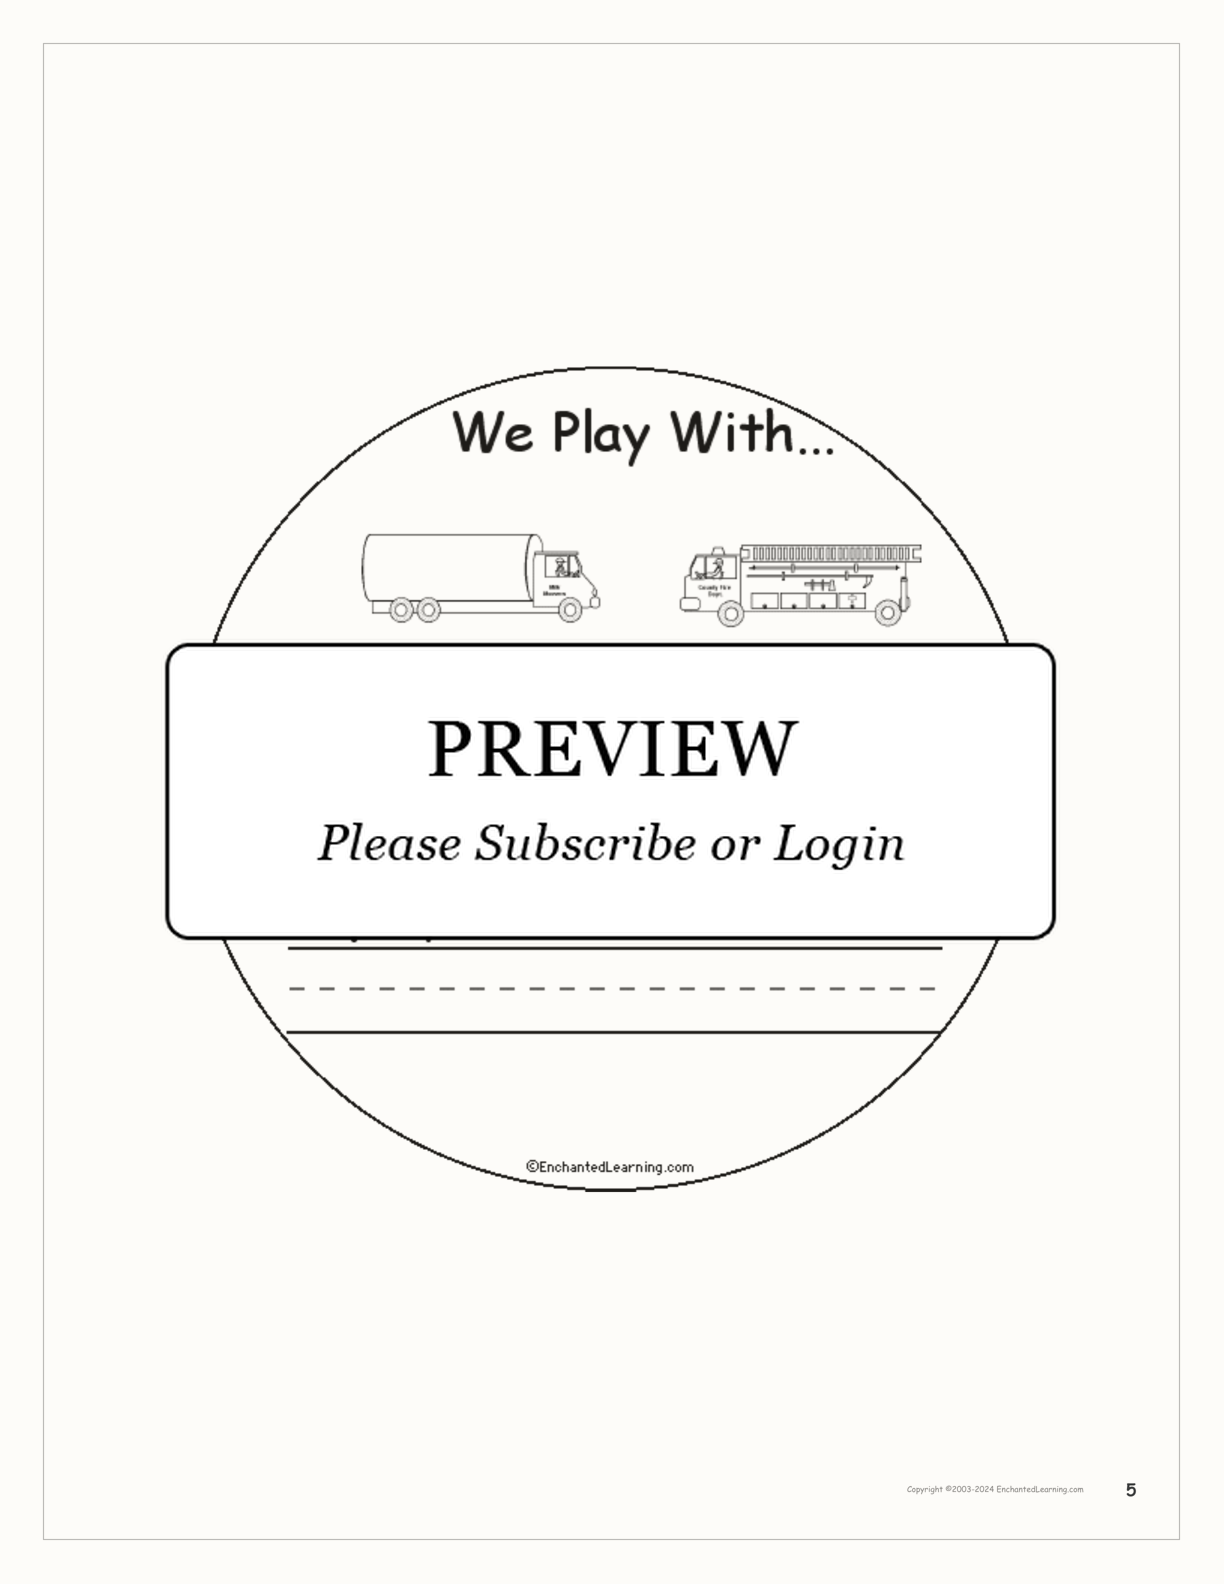 We Play With... Book interactive printout page 5